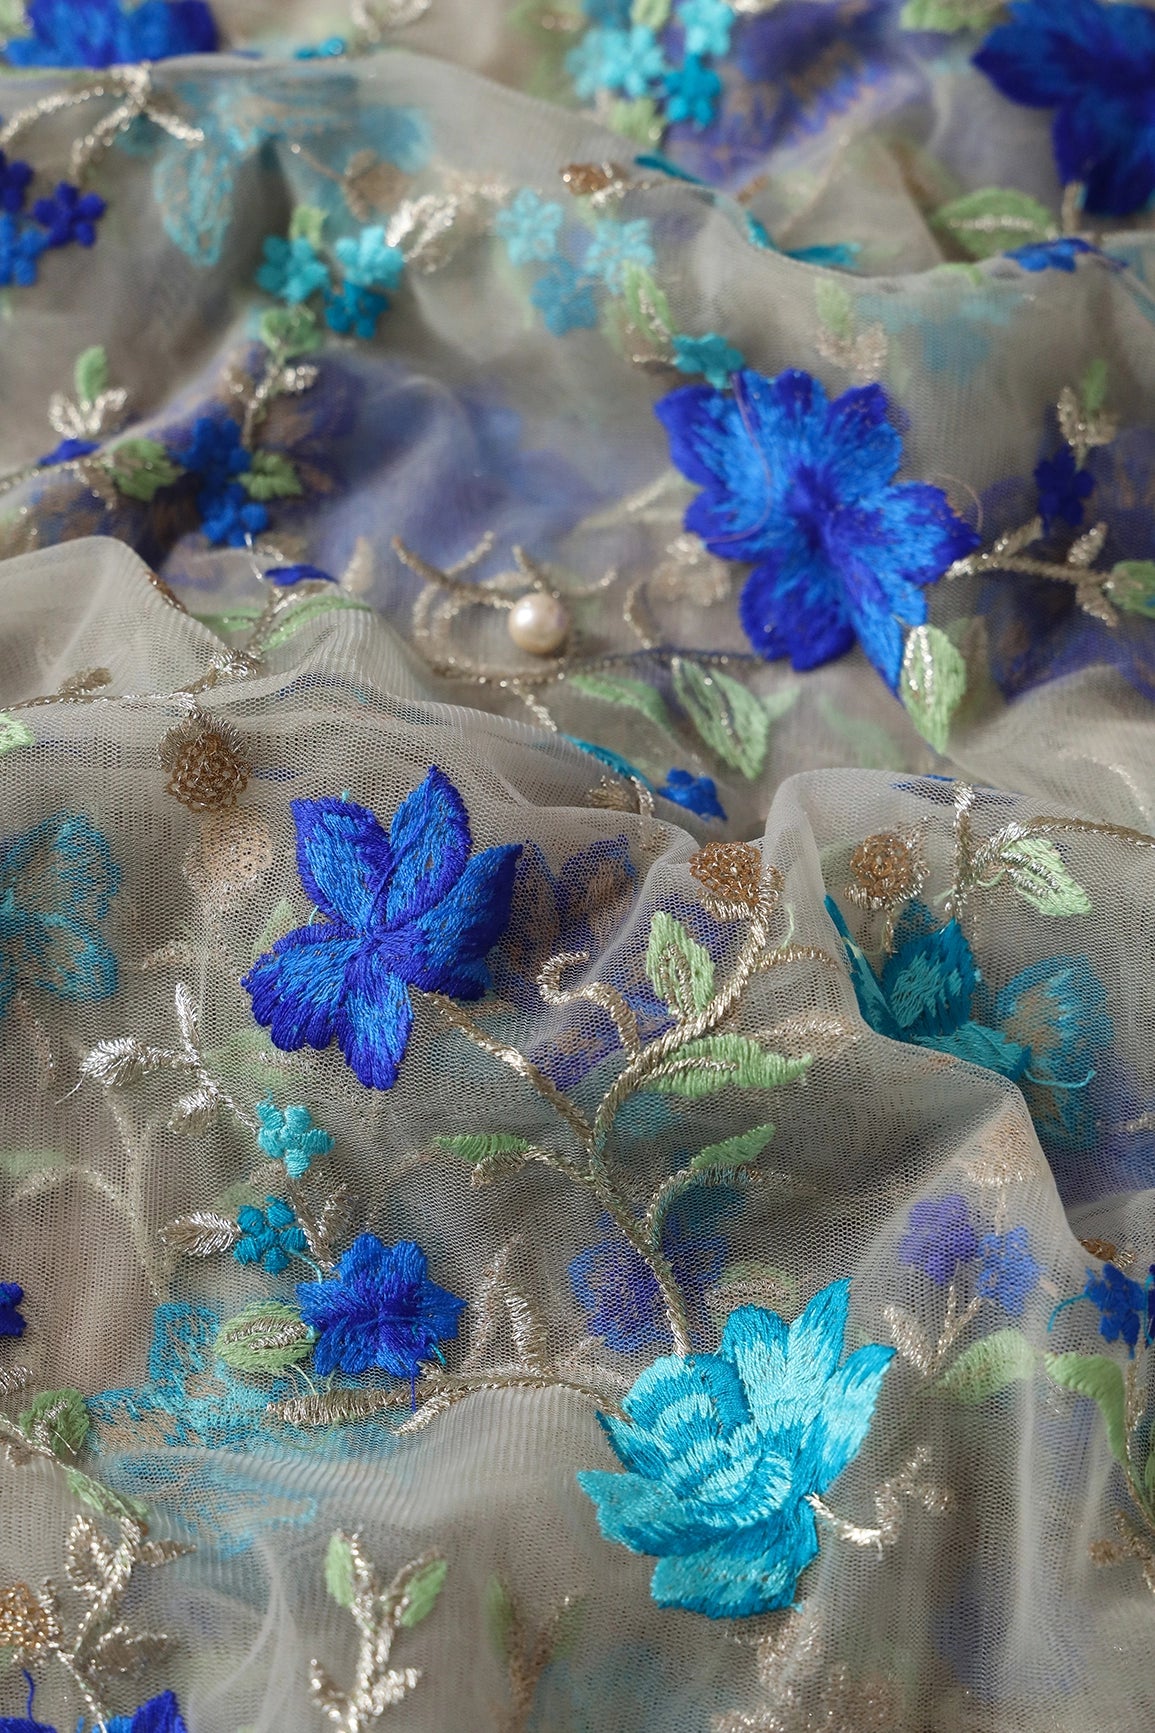 3.75 Meter Cut Piece Of Royal Blue And Teal Thread With Sequins Floral Embroidery On Cream Soft Net Fabric